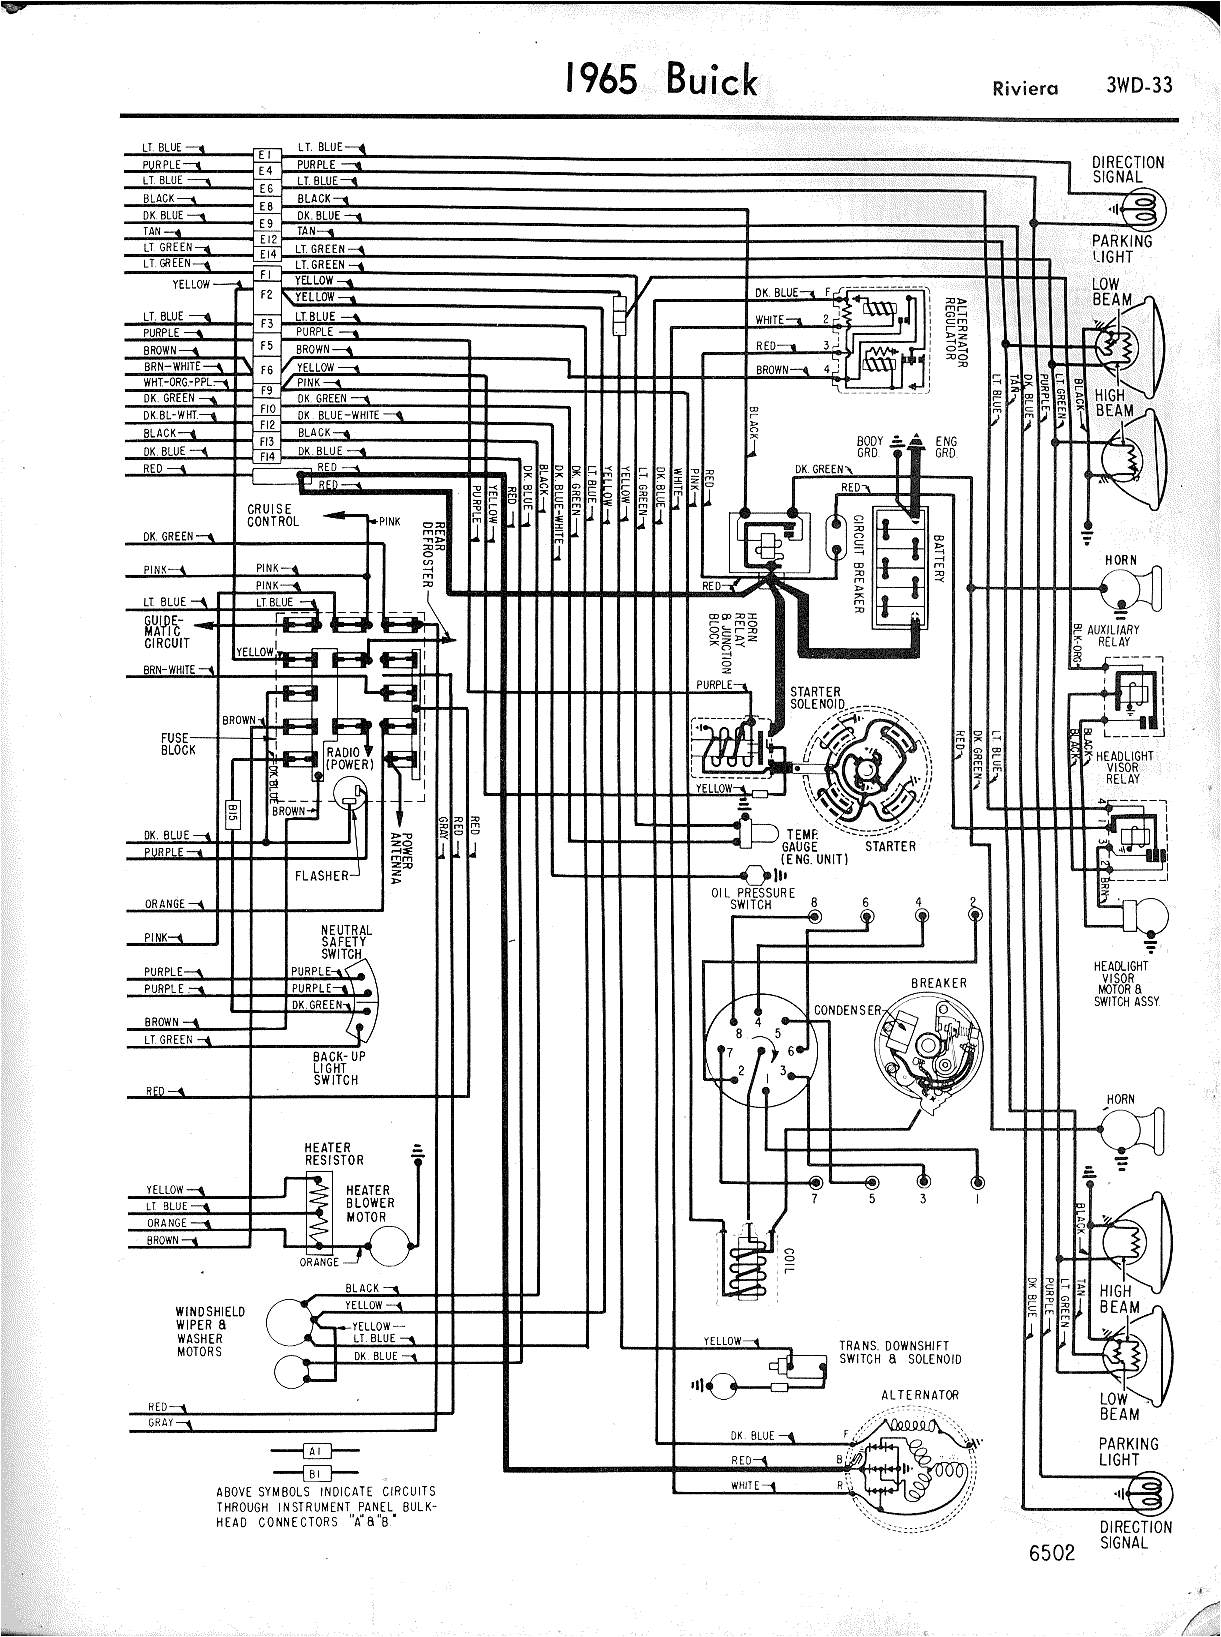 2005 Buick Lesabre Wiring Diagram D298a5 94 Buick Lesabre Fuse Box Wiring Library